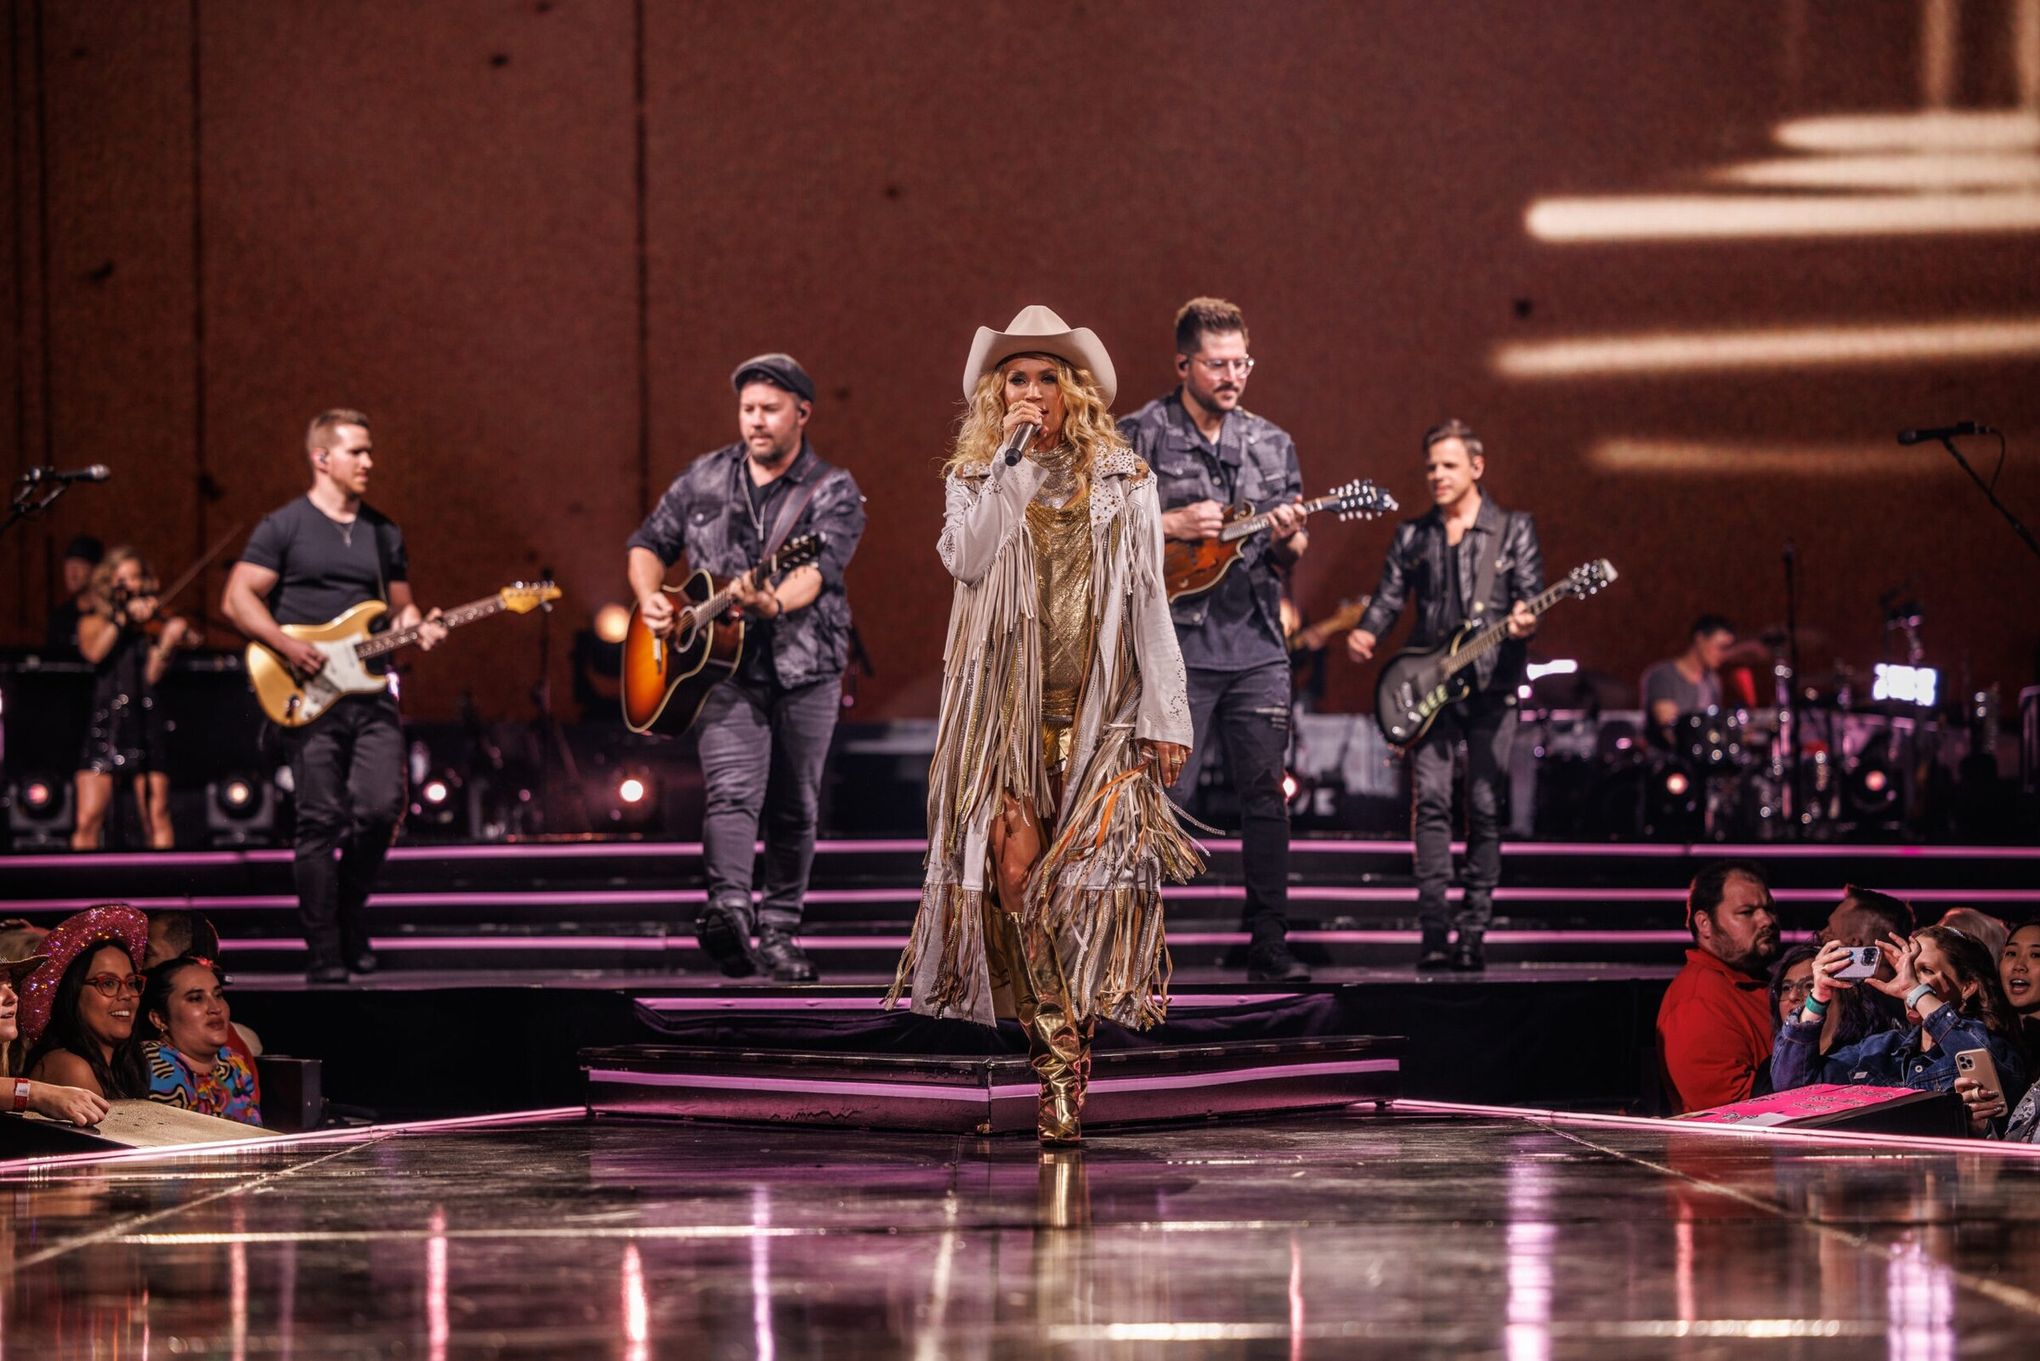 Carrie Underwood announces tour stop at Glendale's Gila River Arena